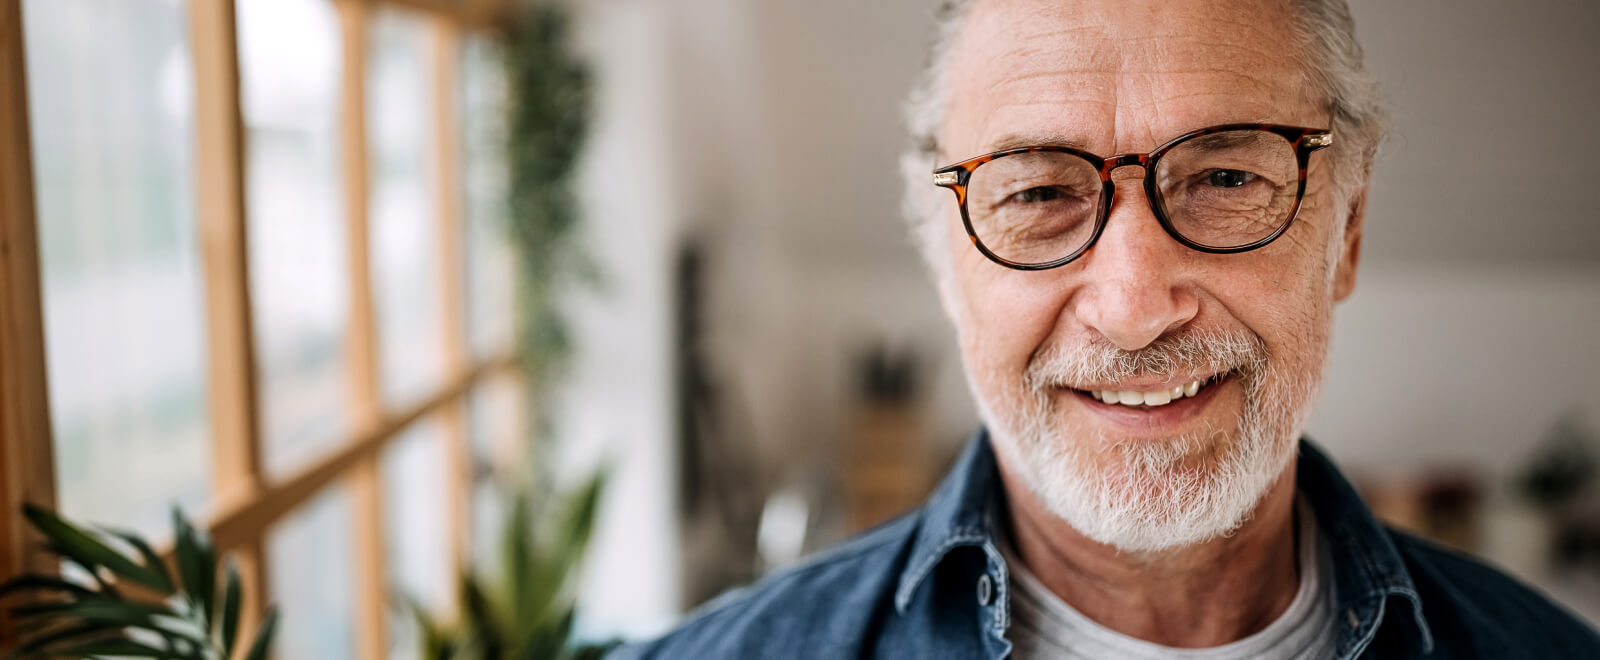 Man with glasses smiling in home